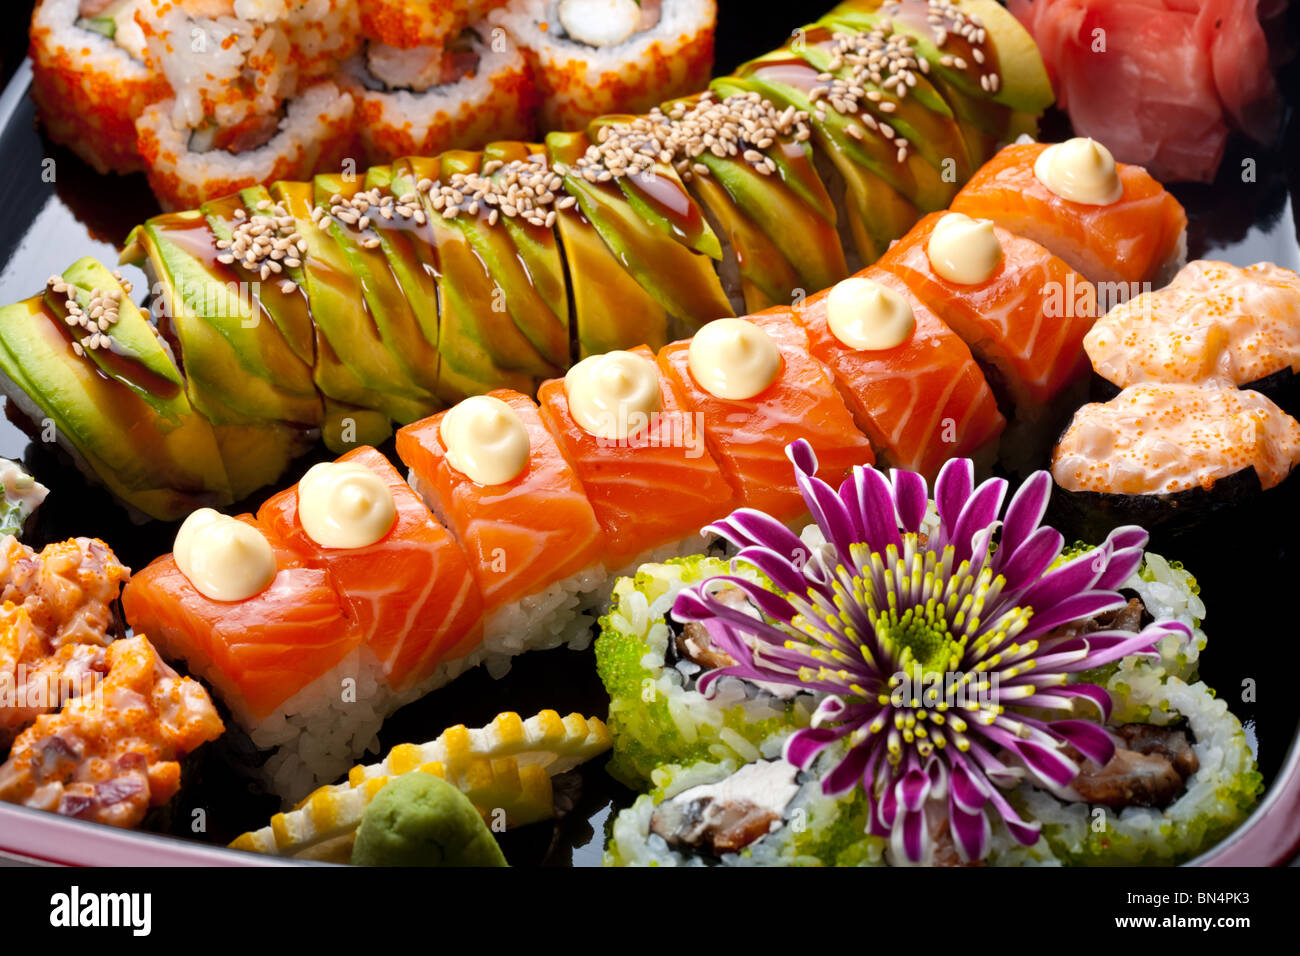 Sushi and rolls Stock Photo